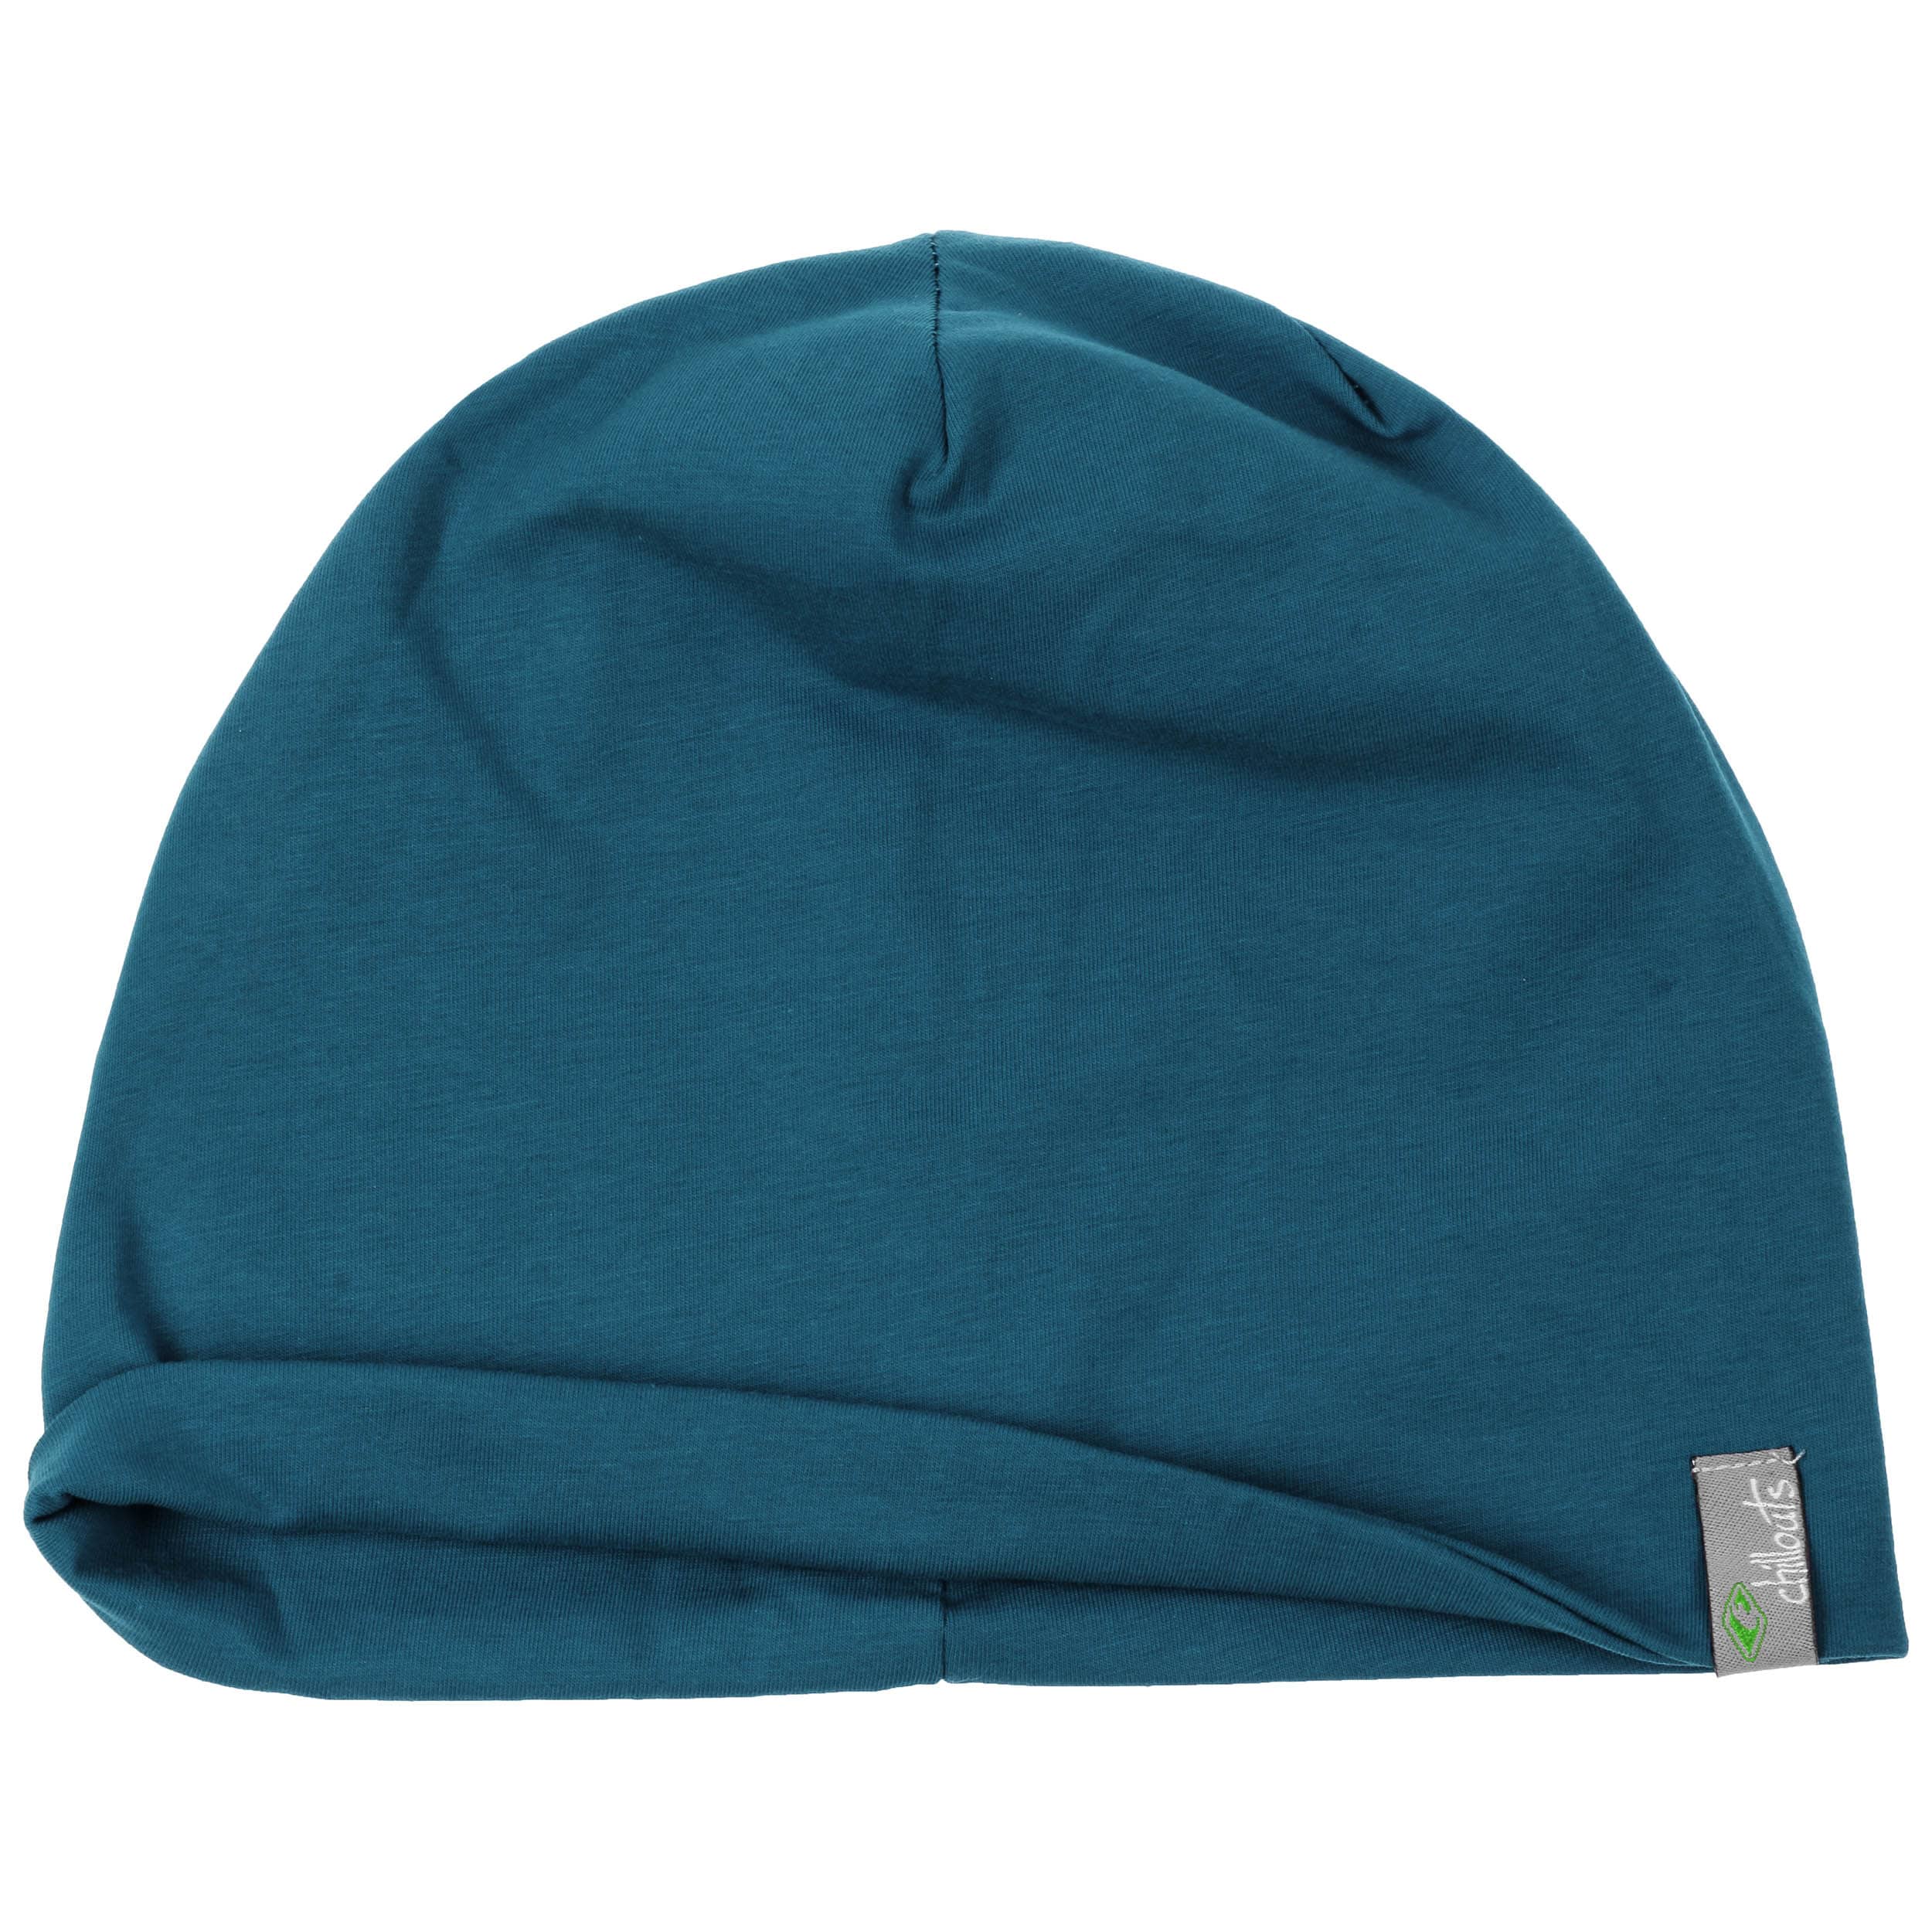 Beanie 24,99 by Acapulco Chillouts € - Oversize